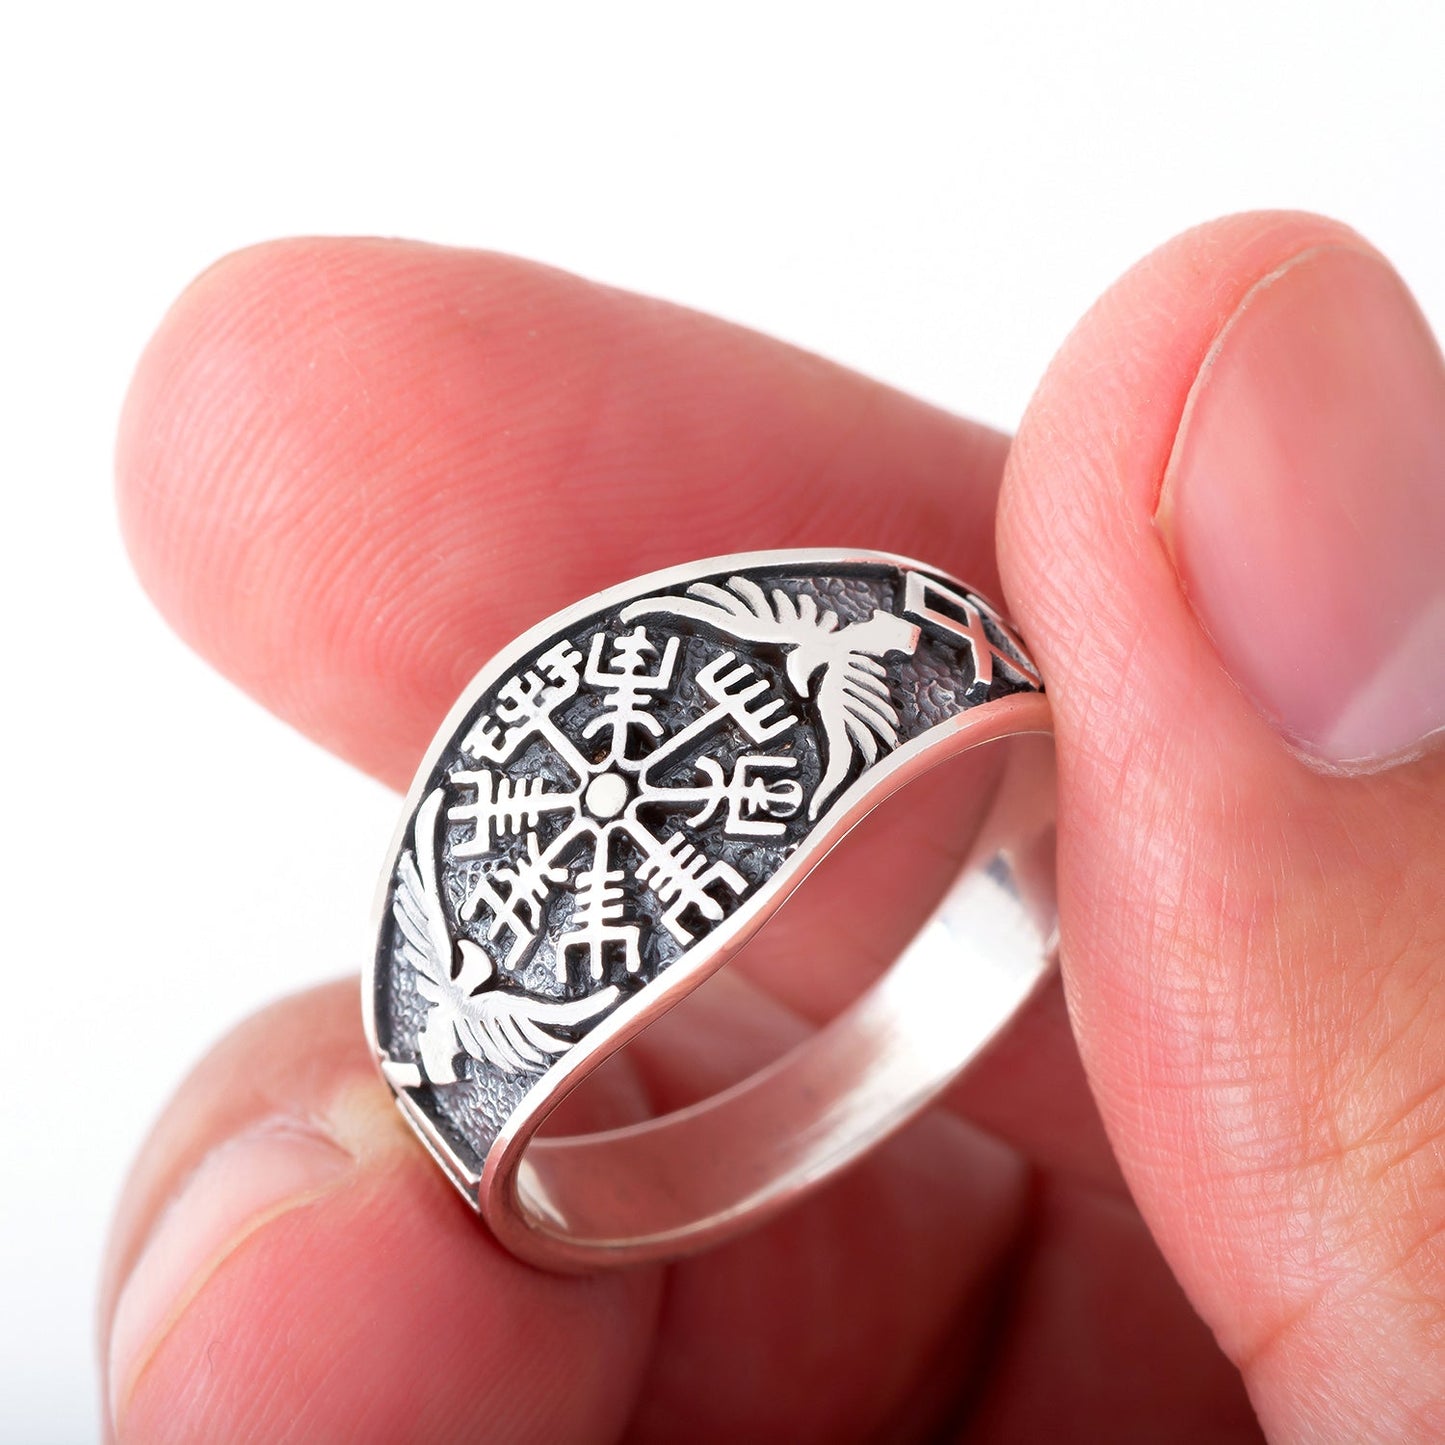 925 Sterling Silver Viking Vegvisir Ring with Raven and Runes - SilverMania925